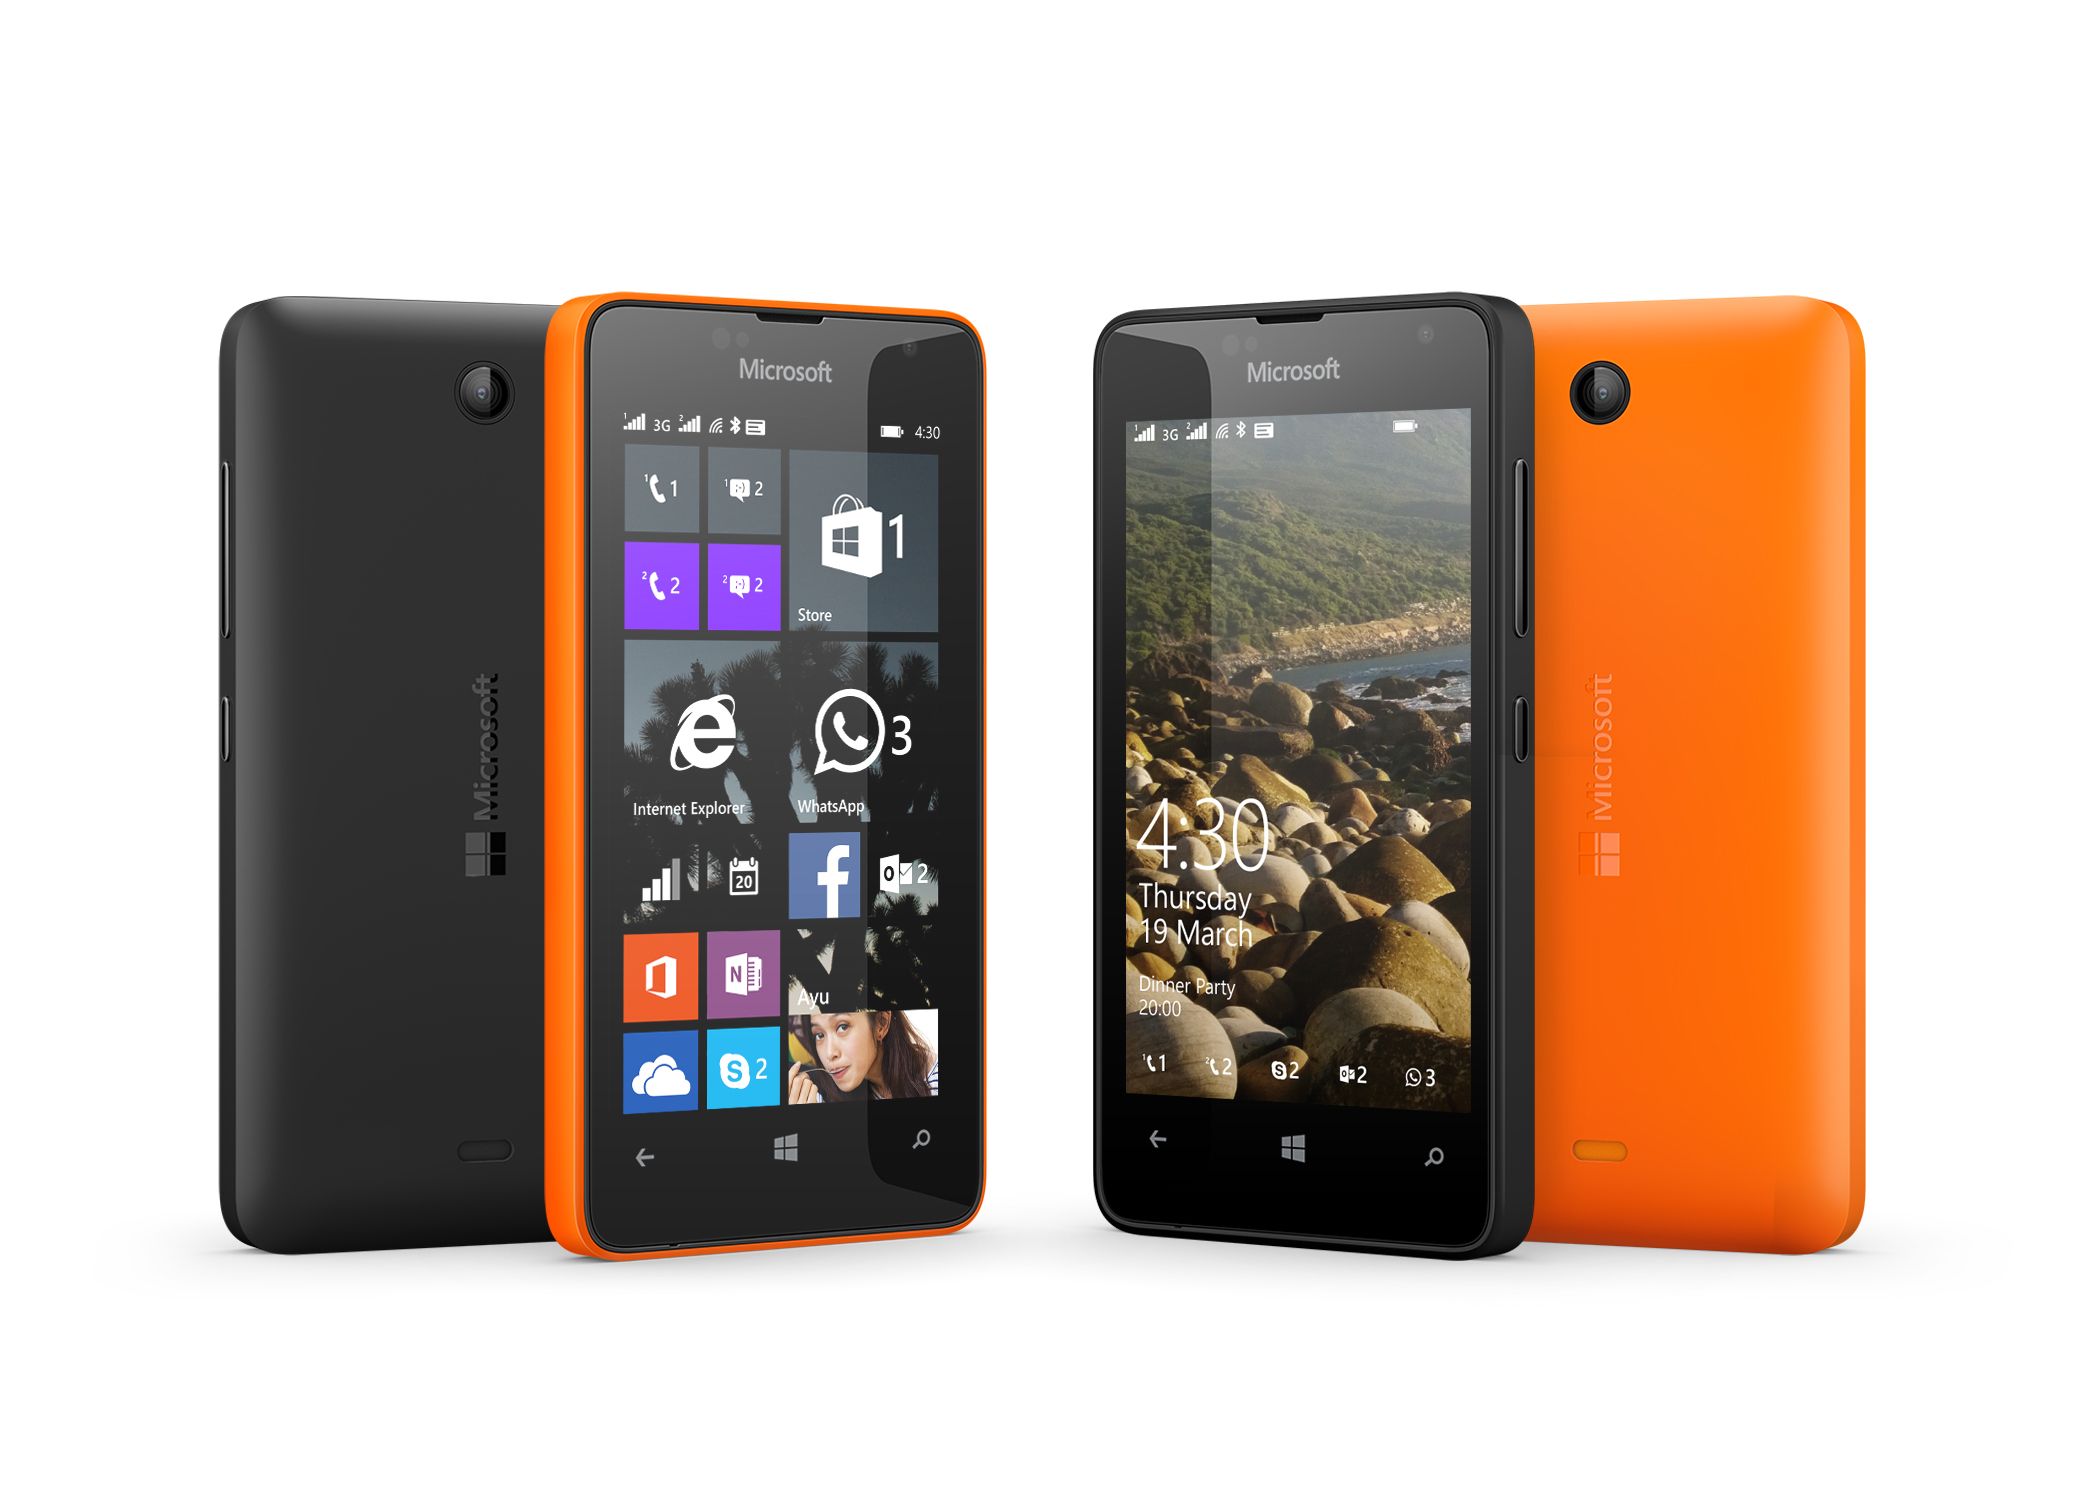 Home and lock screen of a Lumia 430 Smartphone.